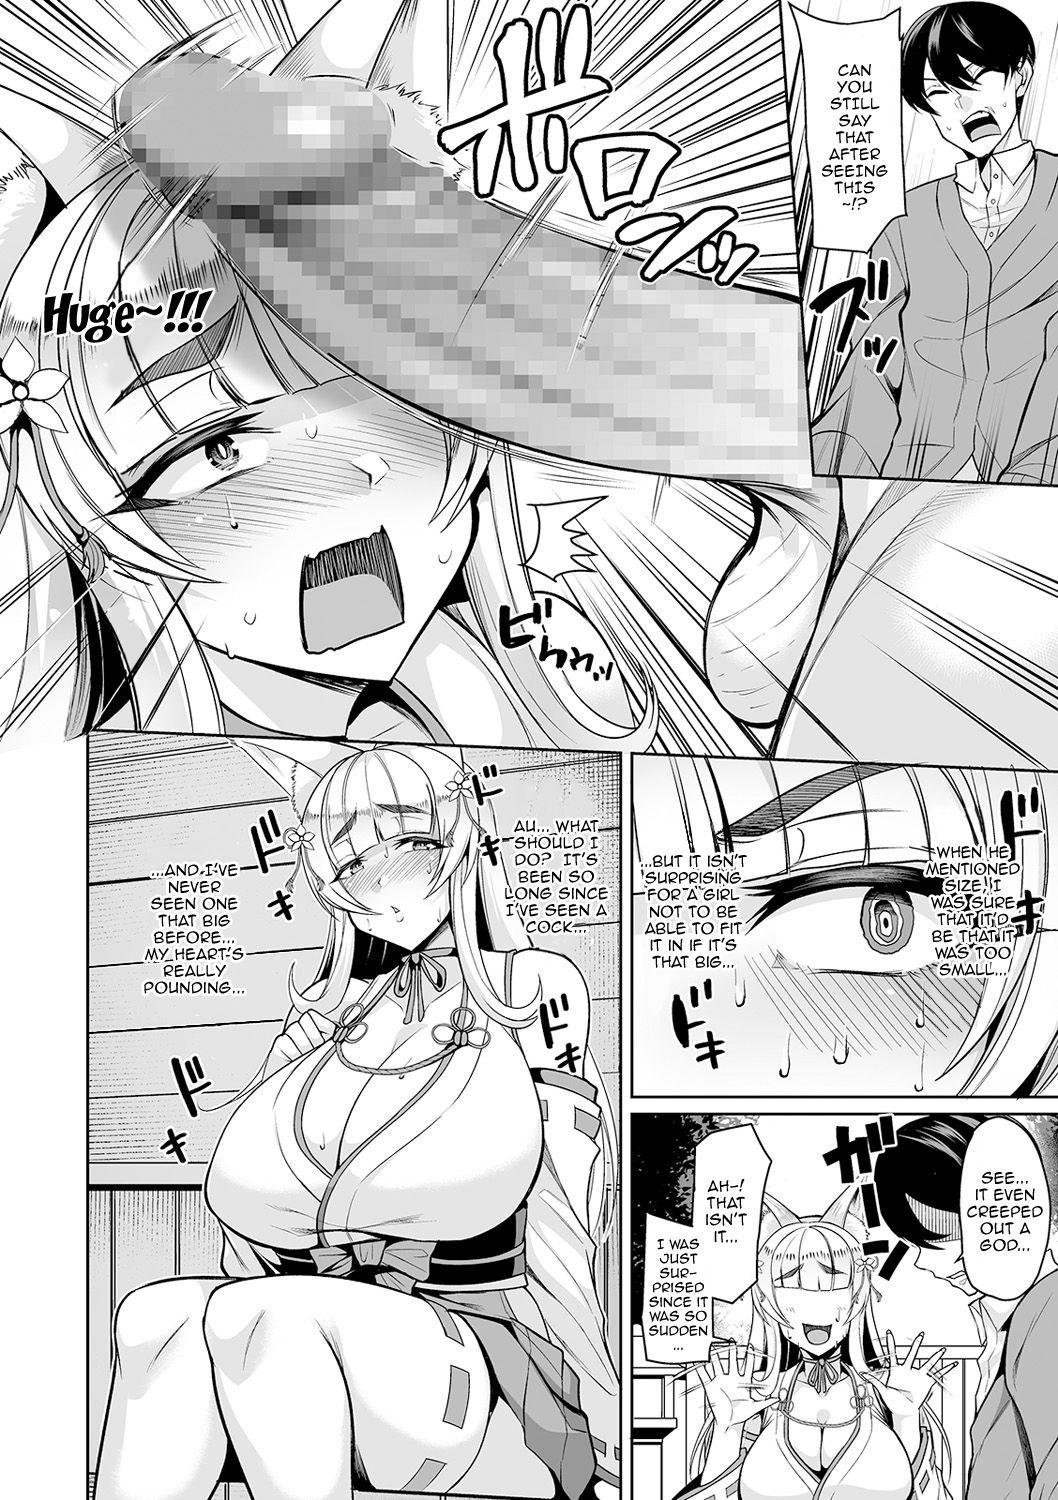 Latin Cos Miko Zuma to Yami Otoko | The Cosplaying Shrine Maiden And The Suffering Man Foot Fetish - Page 4